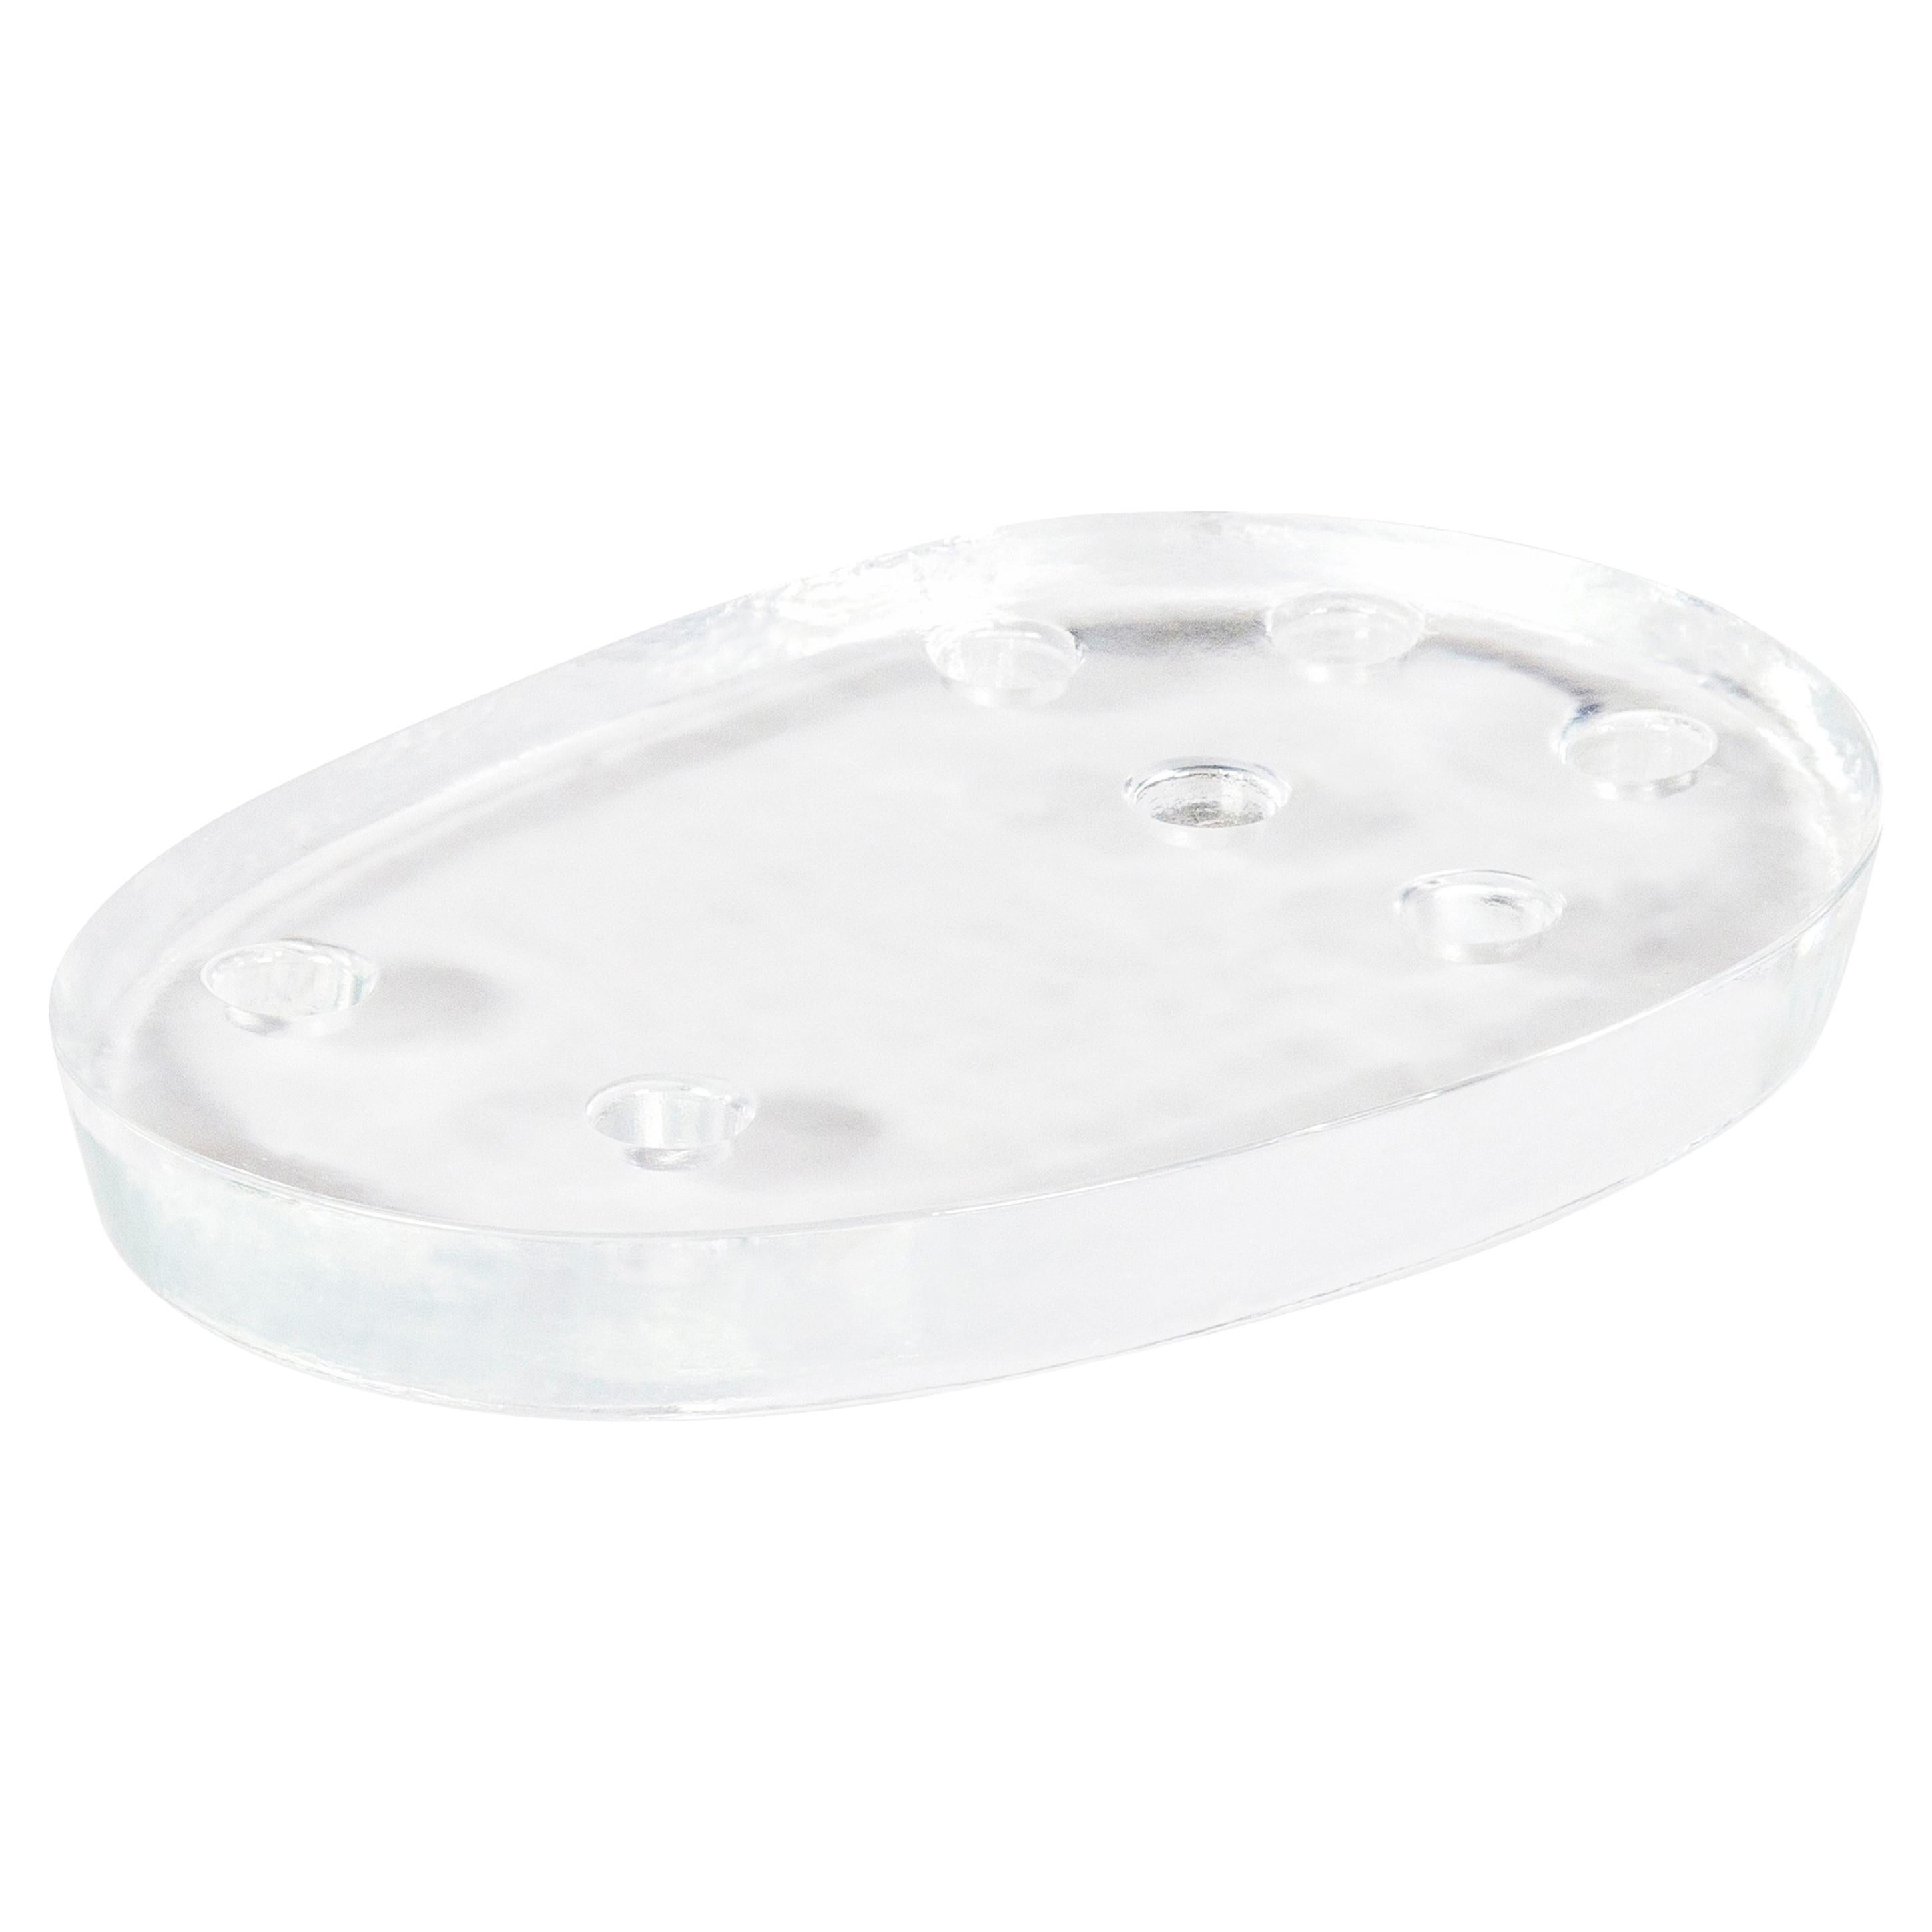 Atoll Big Transparent Candle Holder by Pulpo For Sale